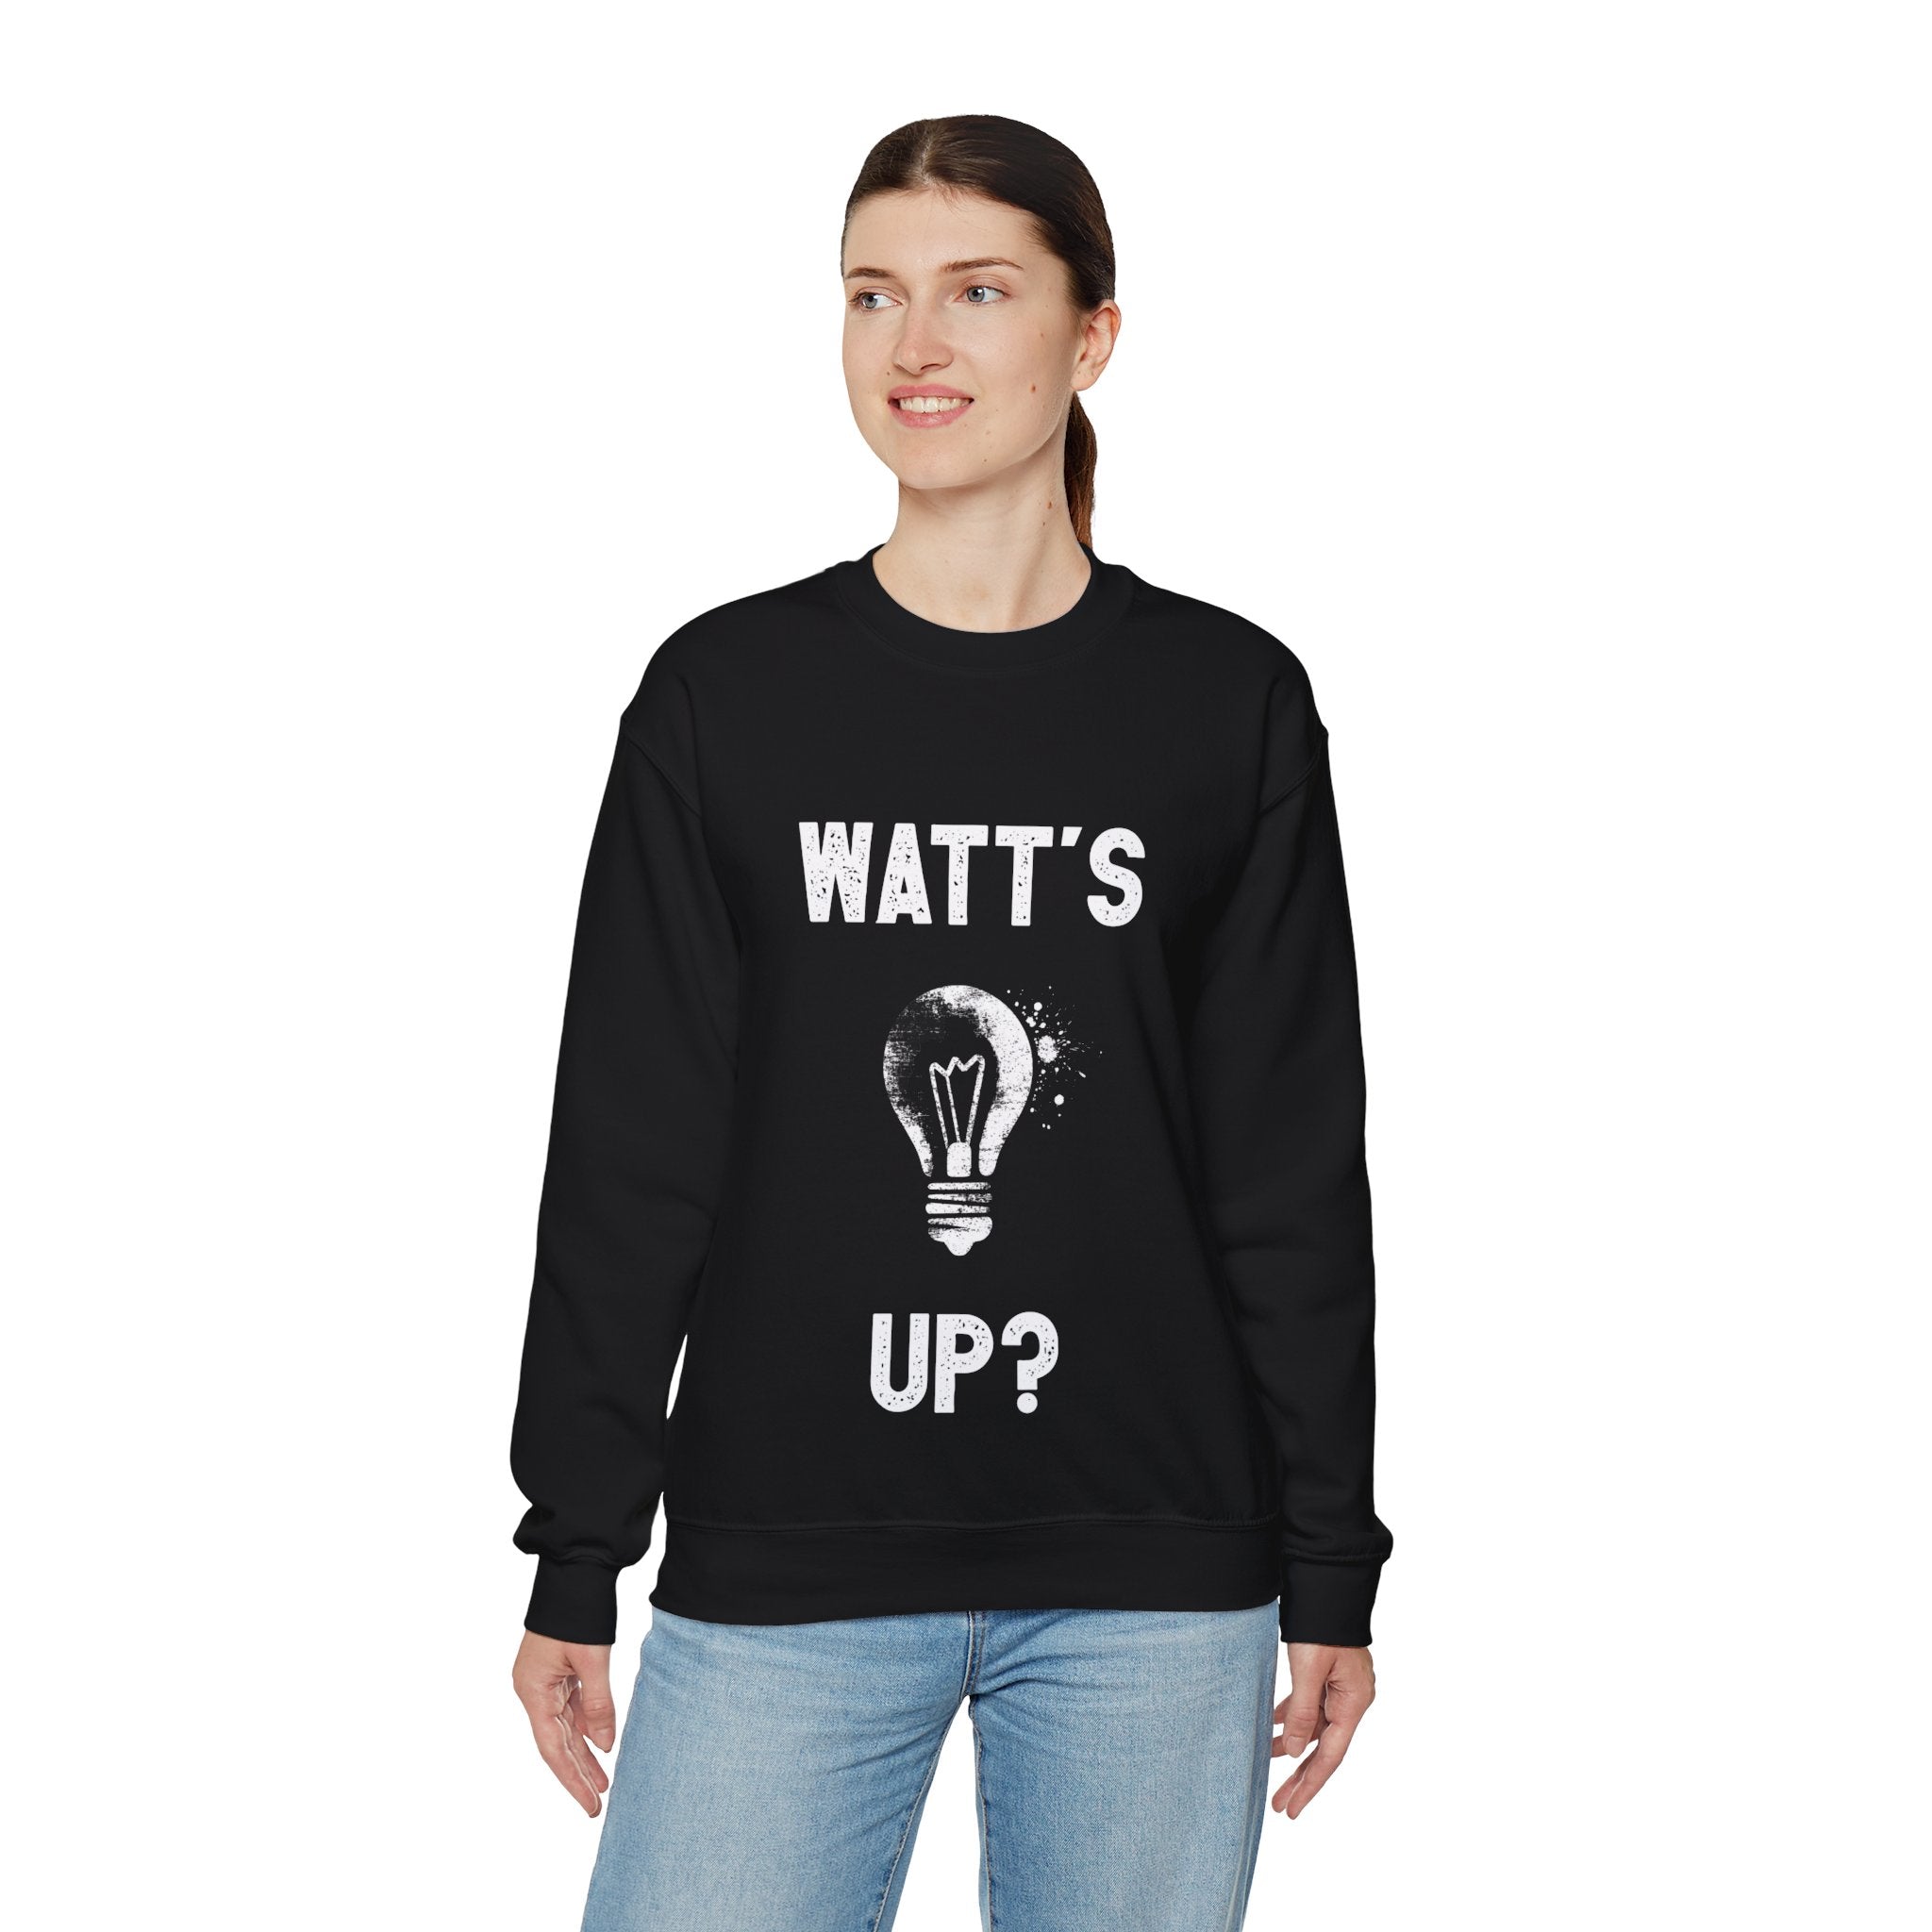 A person is wearing a trendy black "Watts Up - Sweatshirt" with the text "WATT'S UP?" and a light bulb graphic on the front, perfect to stay cozy during the colder months.